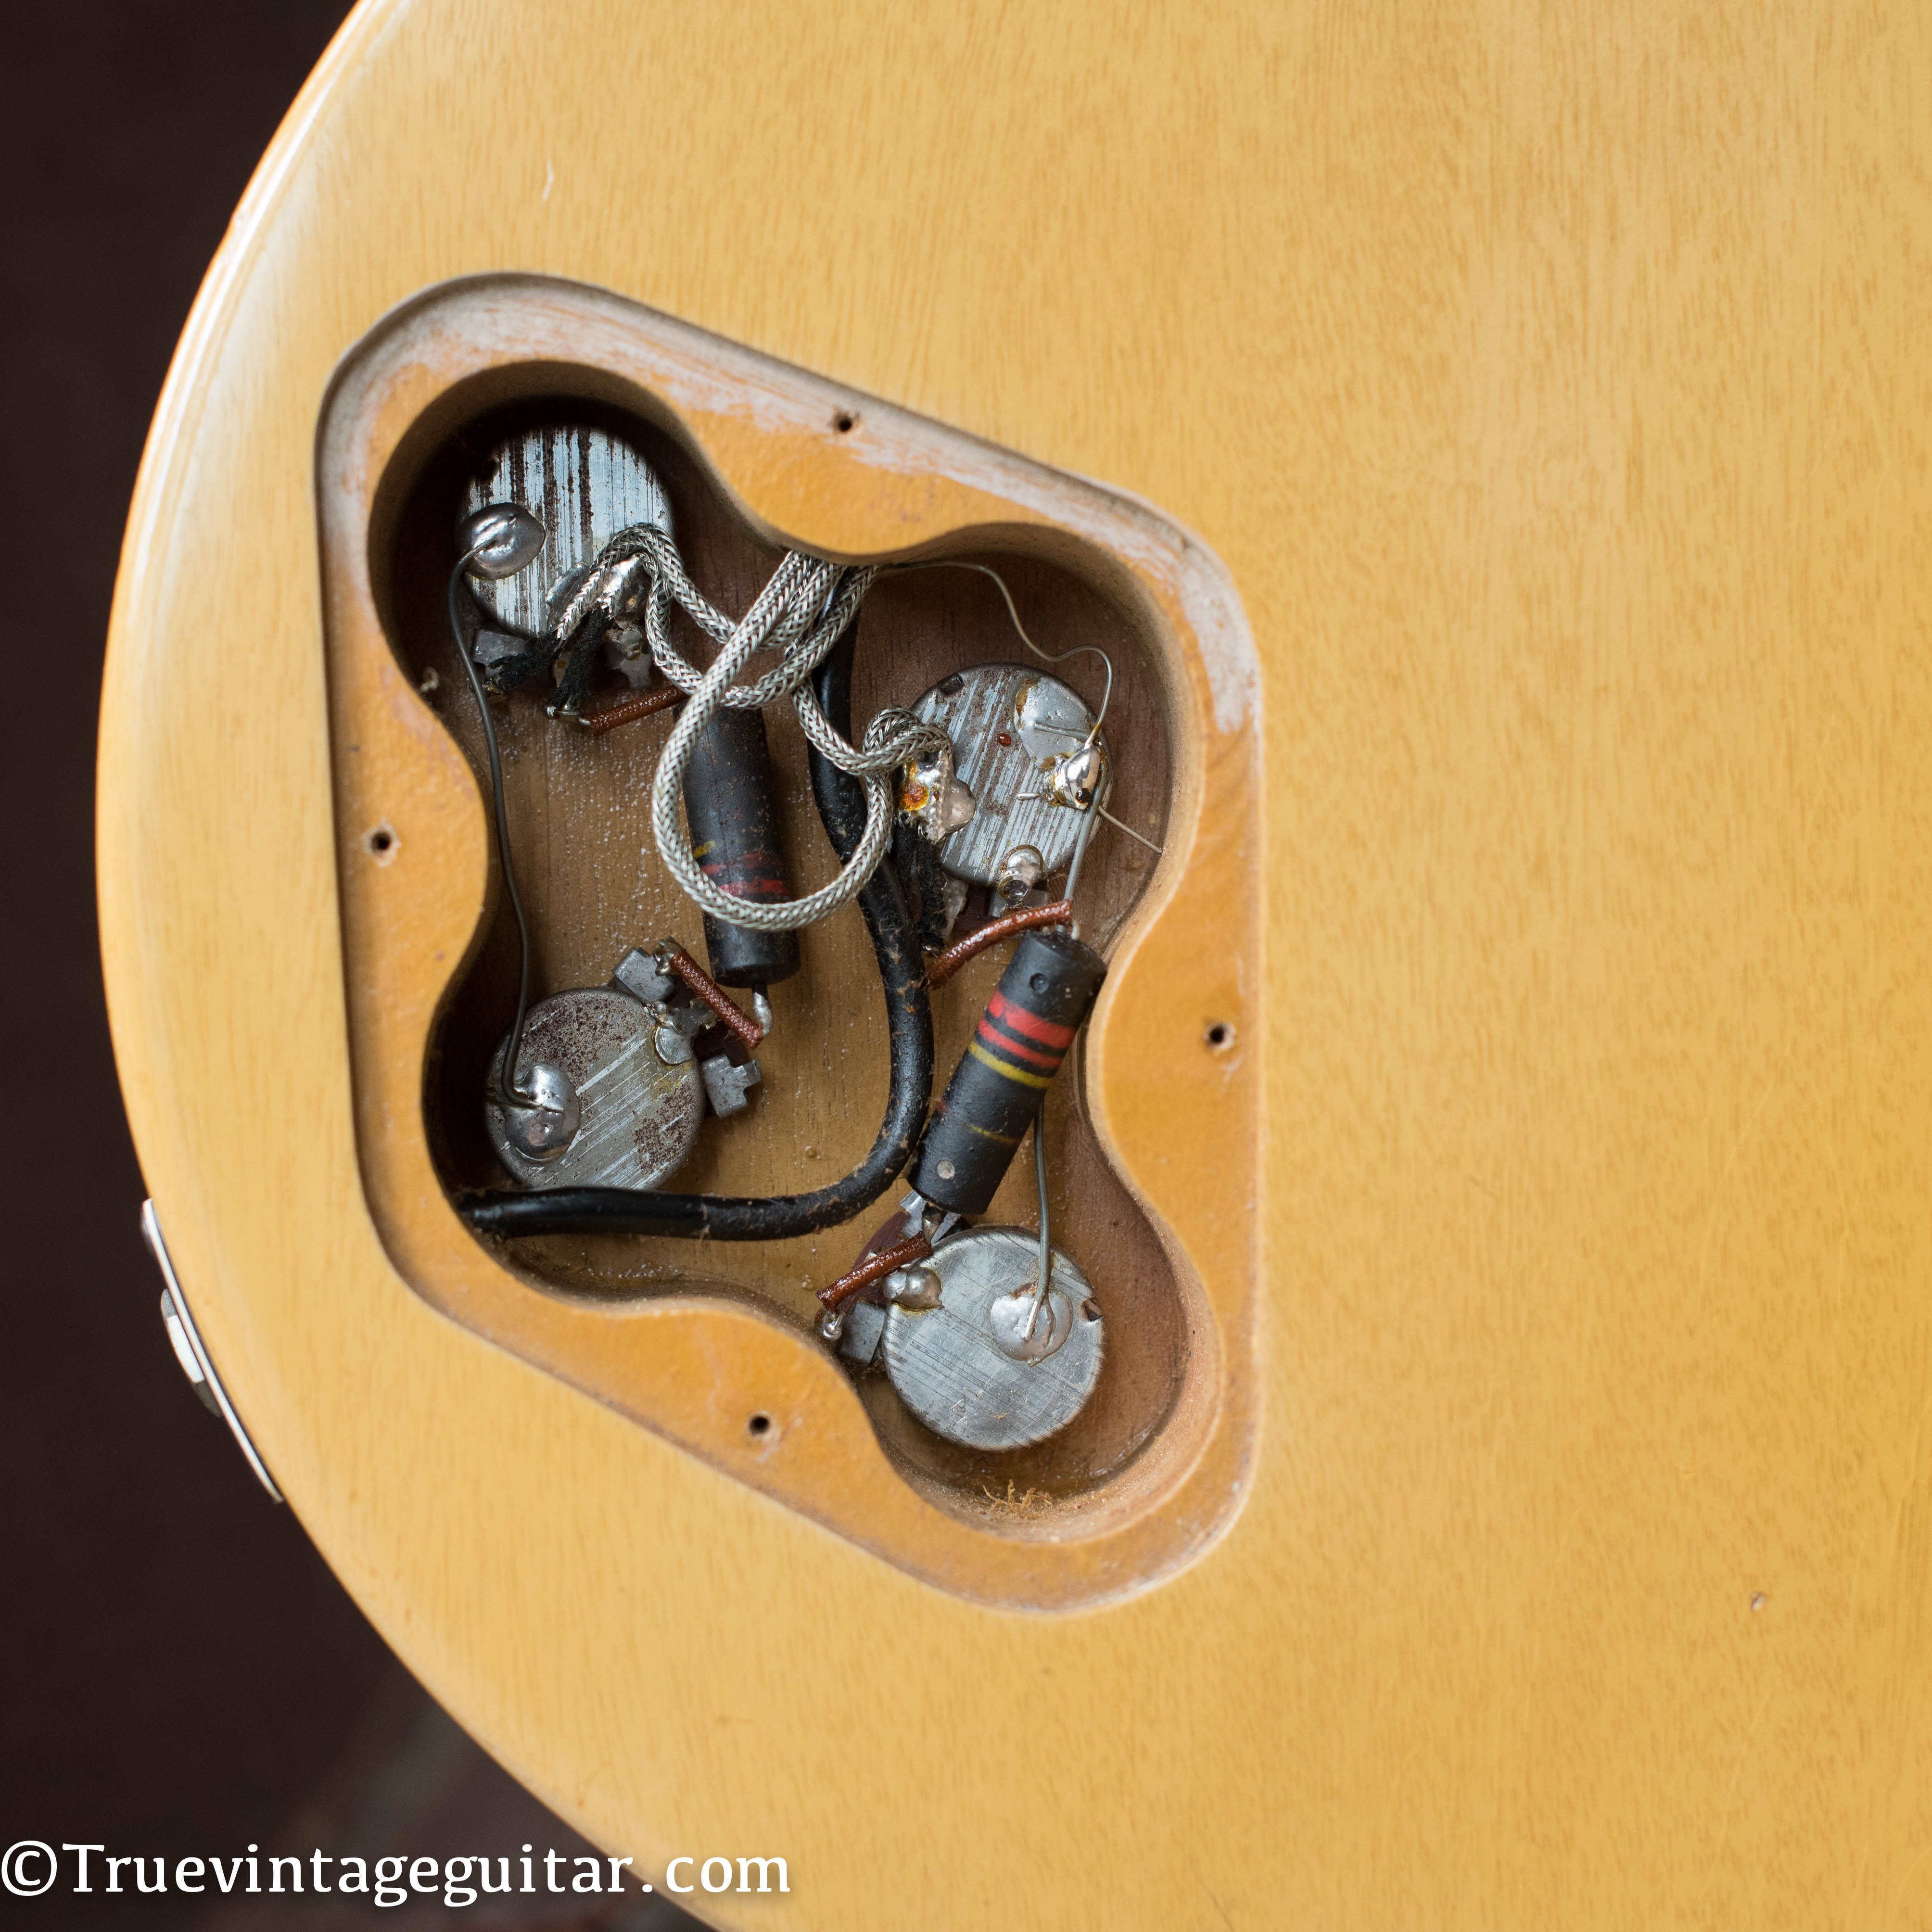 Control cavity, potentiometers, capacitor, 1957 Gibson Les Paul Special